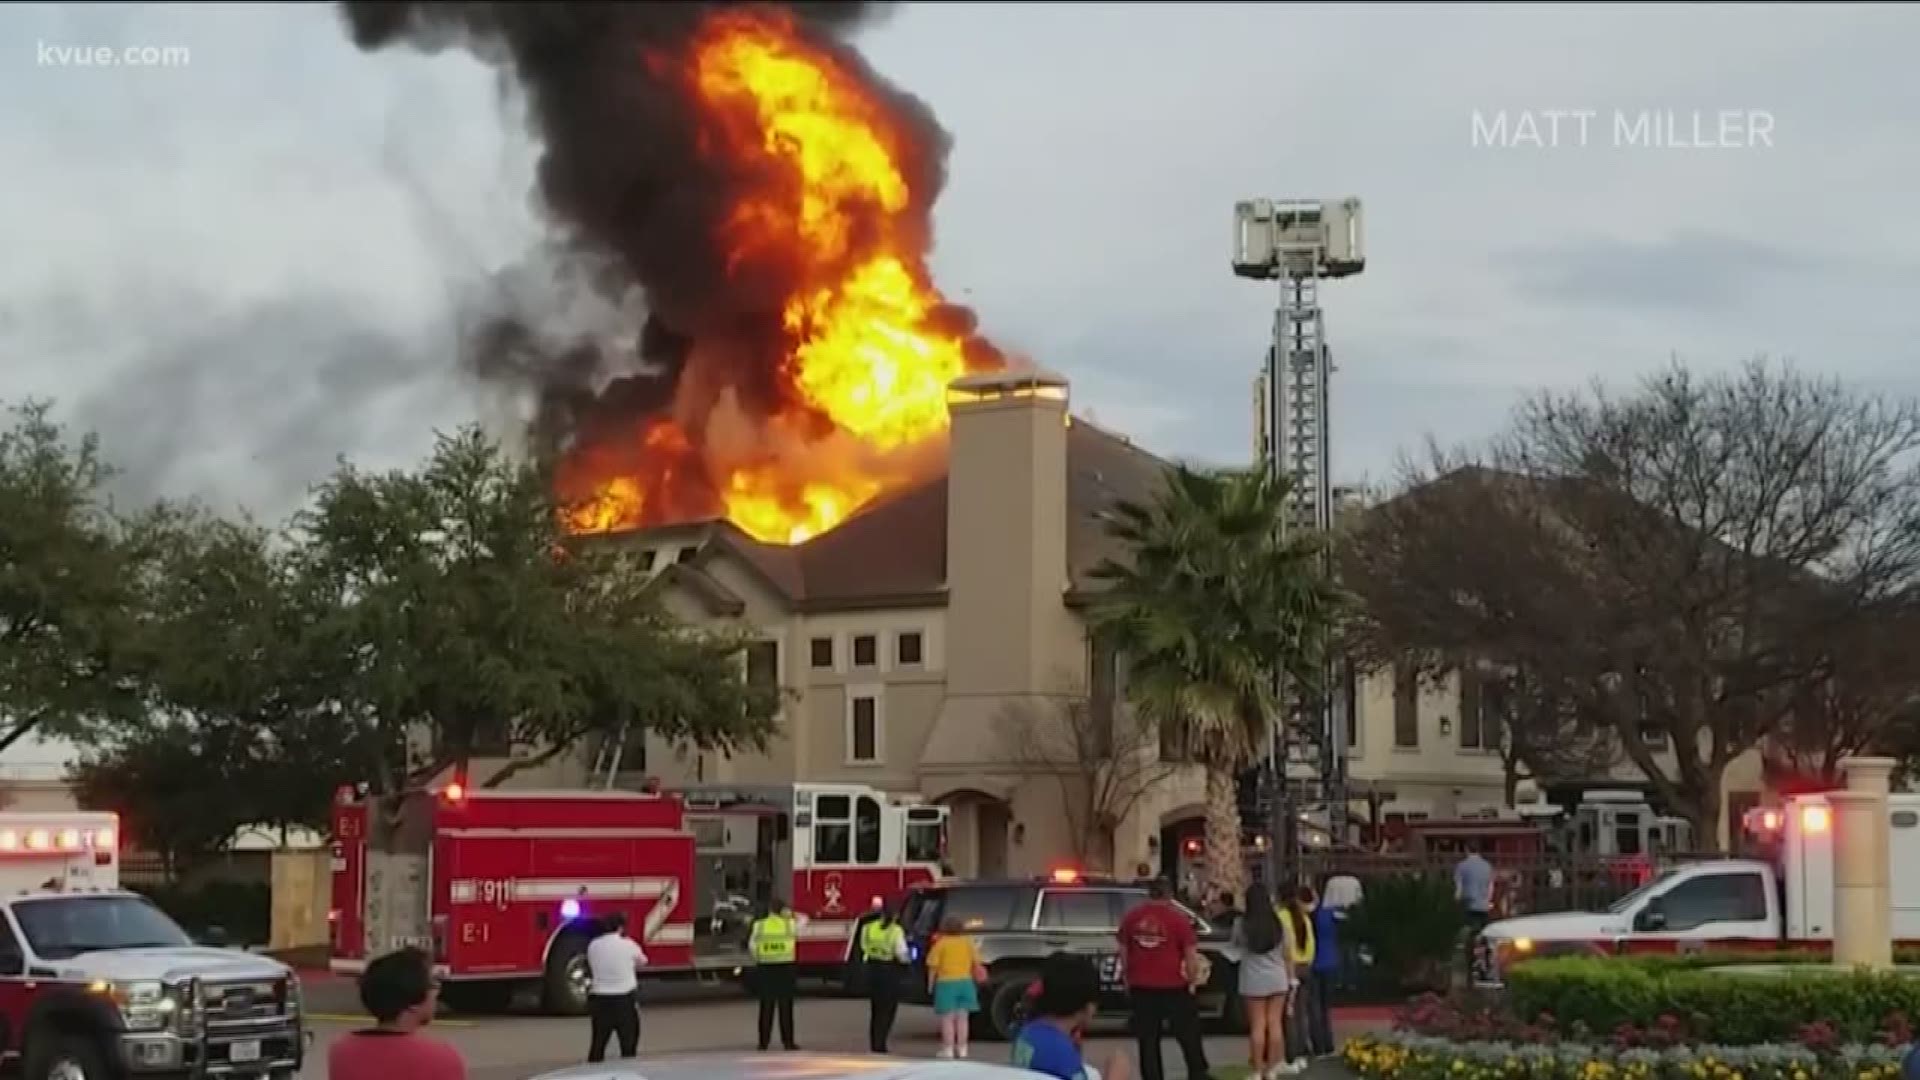 The fire destroyed a Round Rock apartment complex and displaced 22 people. But those people are frustrated with how property managers treated them after the fire.